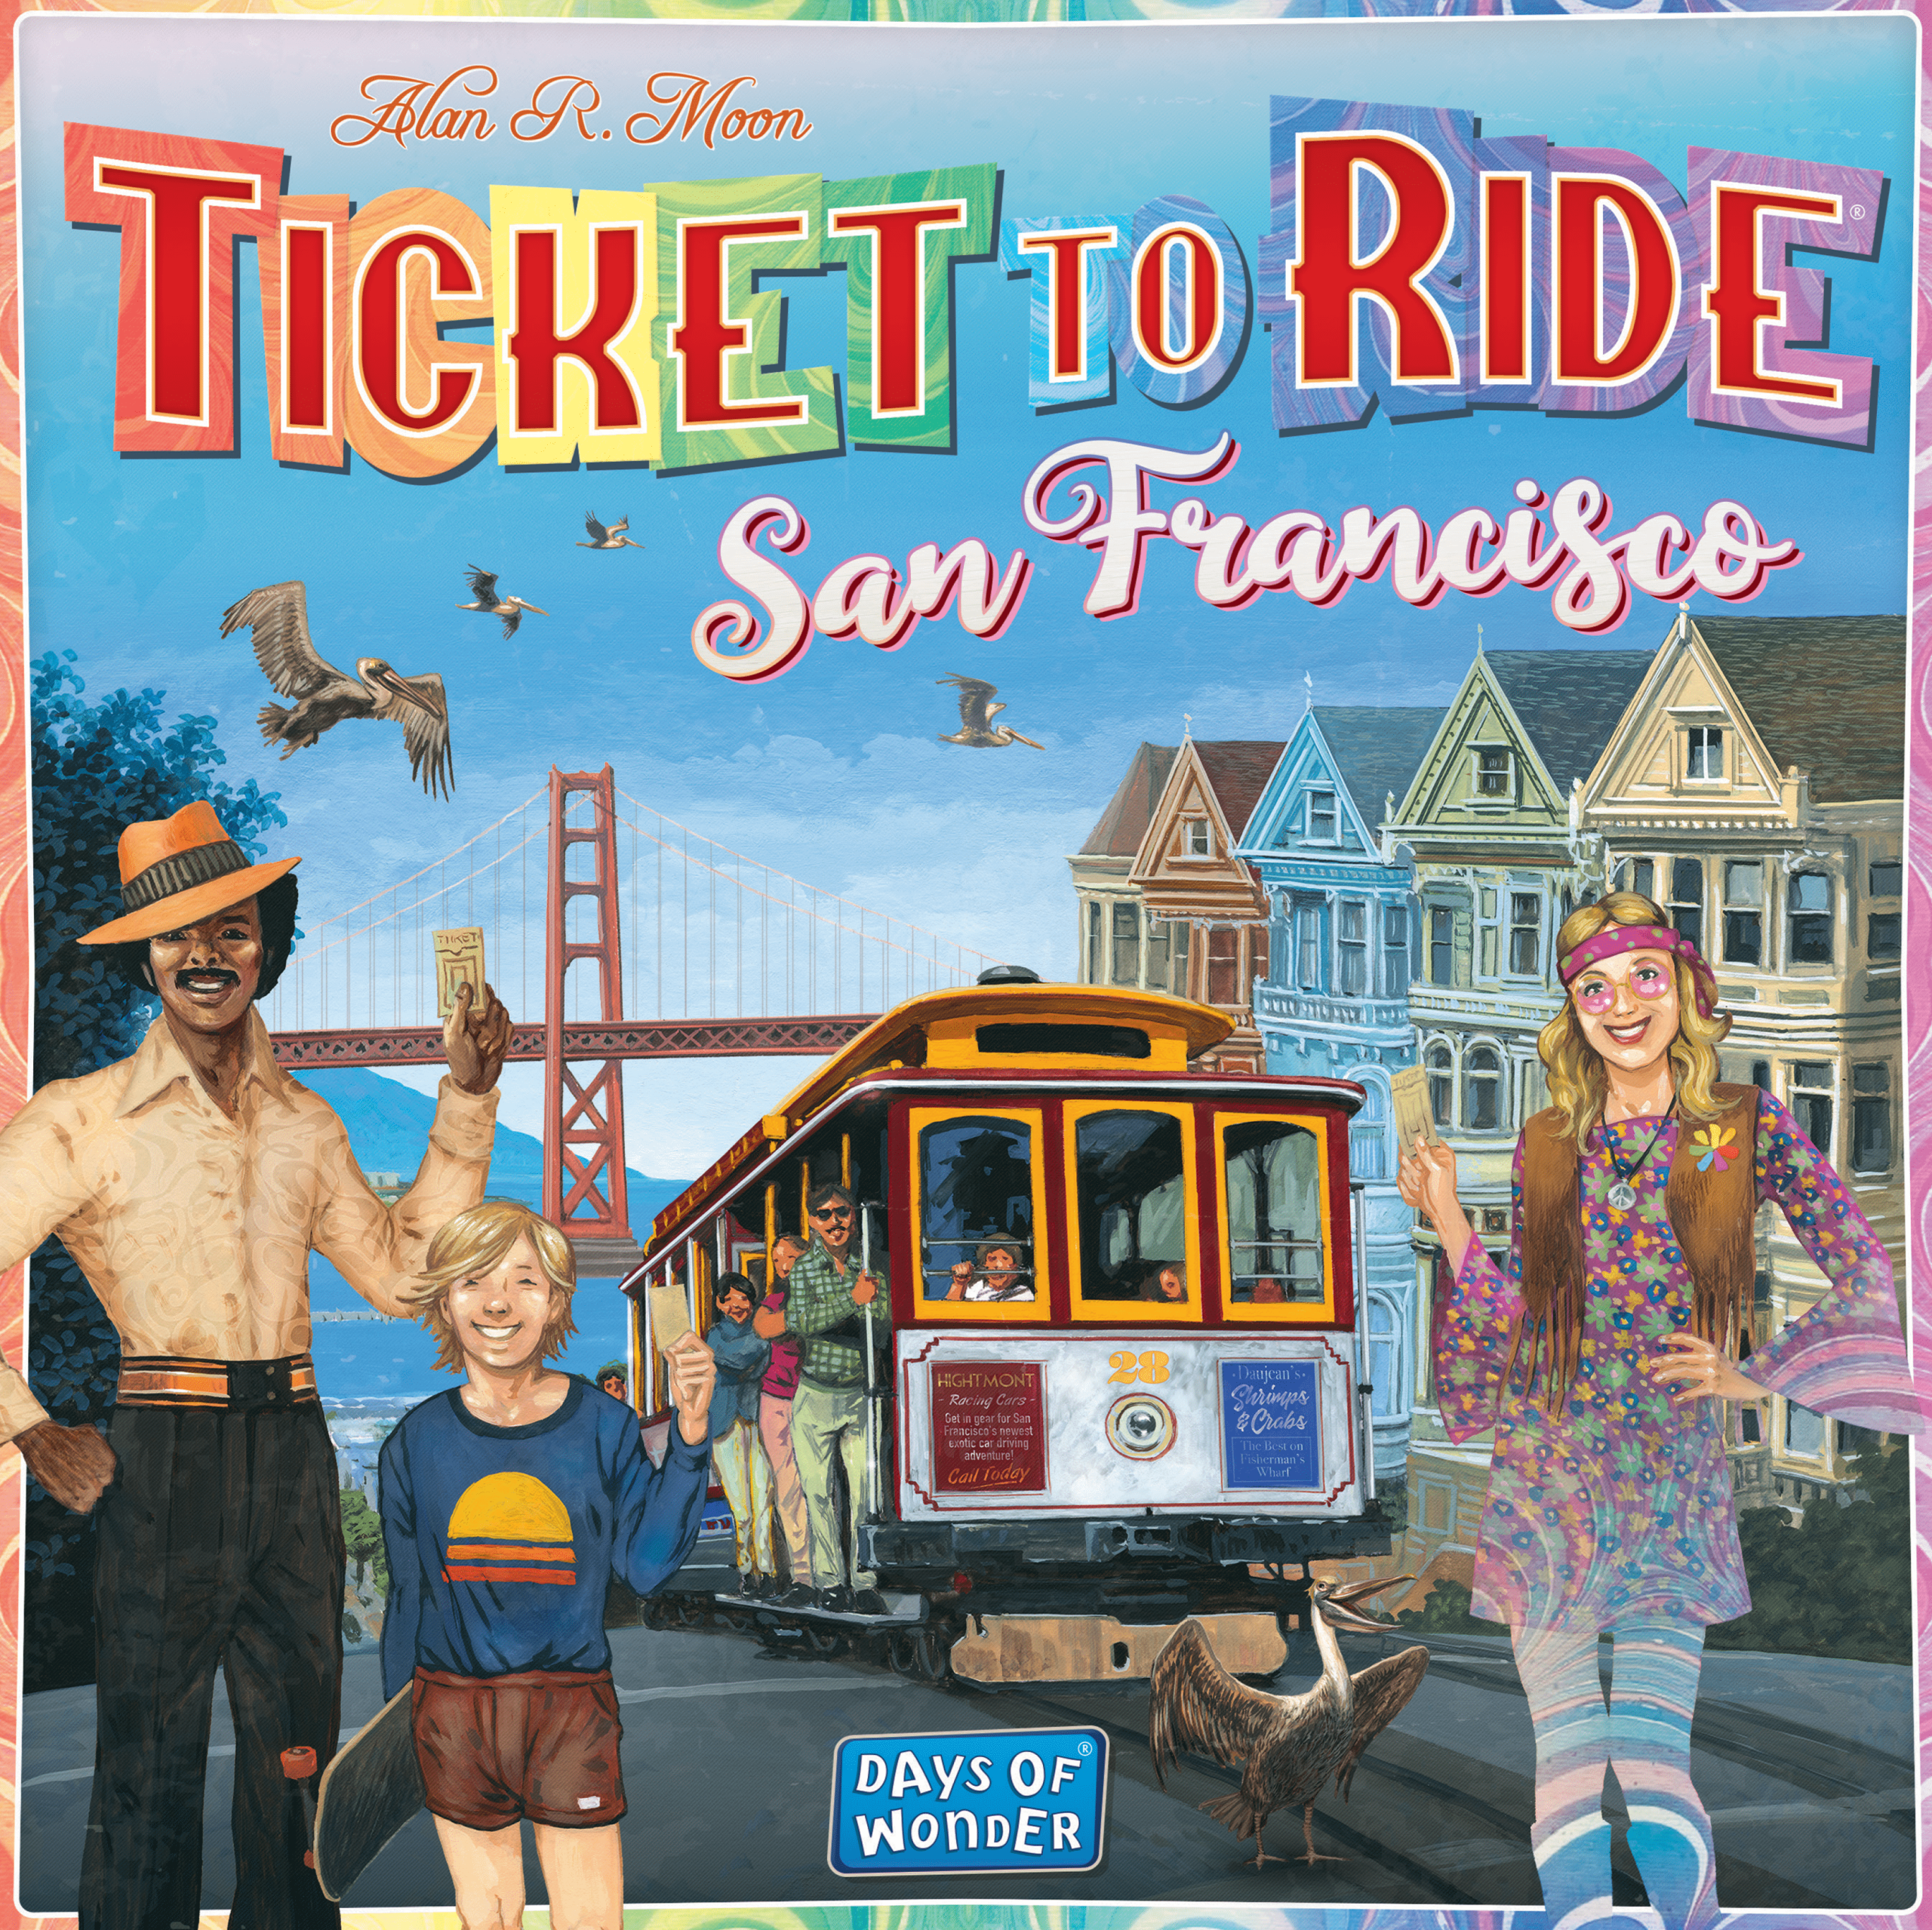 Buy Ticket to Ride: San Francisco only at Bored Game Company.